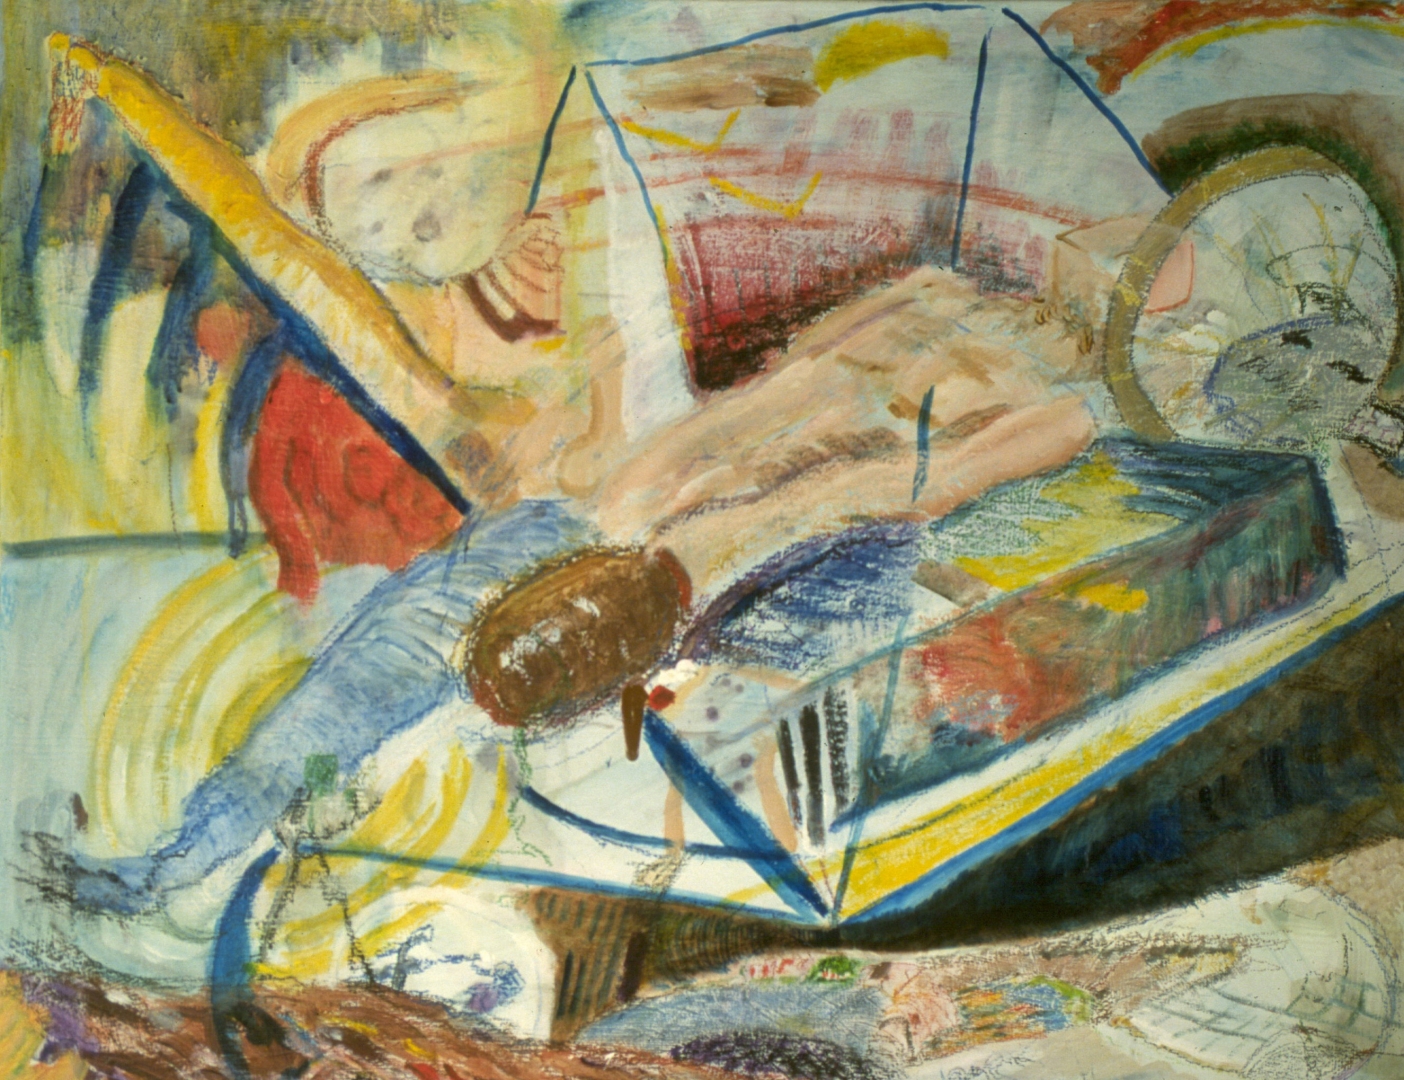 You Are The Ghost in the Machine: The Subconscious Mind, 2002. Acrylic and Oil Pastel on canvas, 48" x 35".